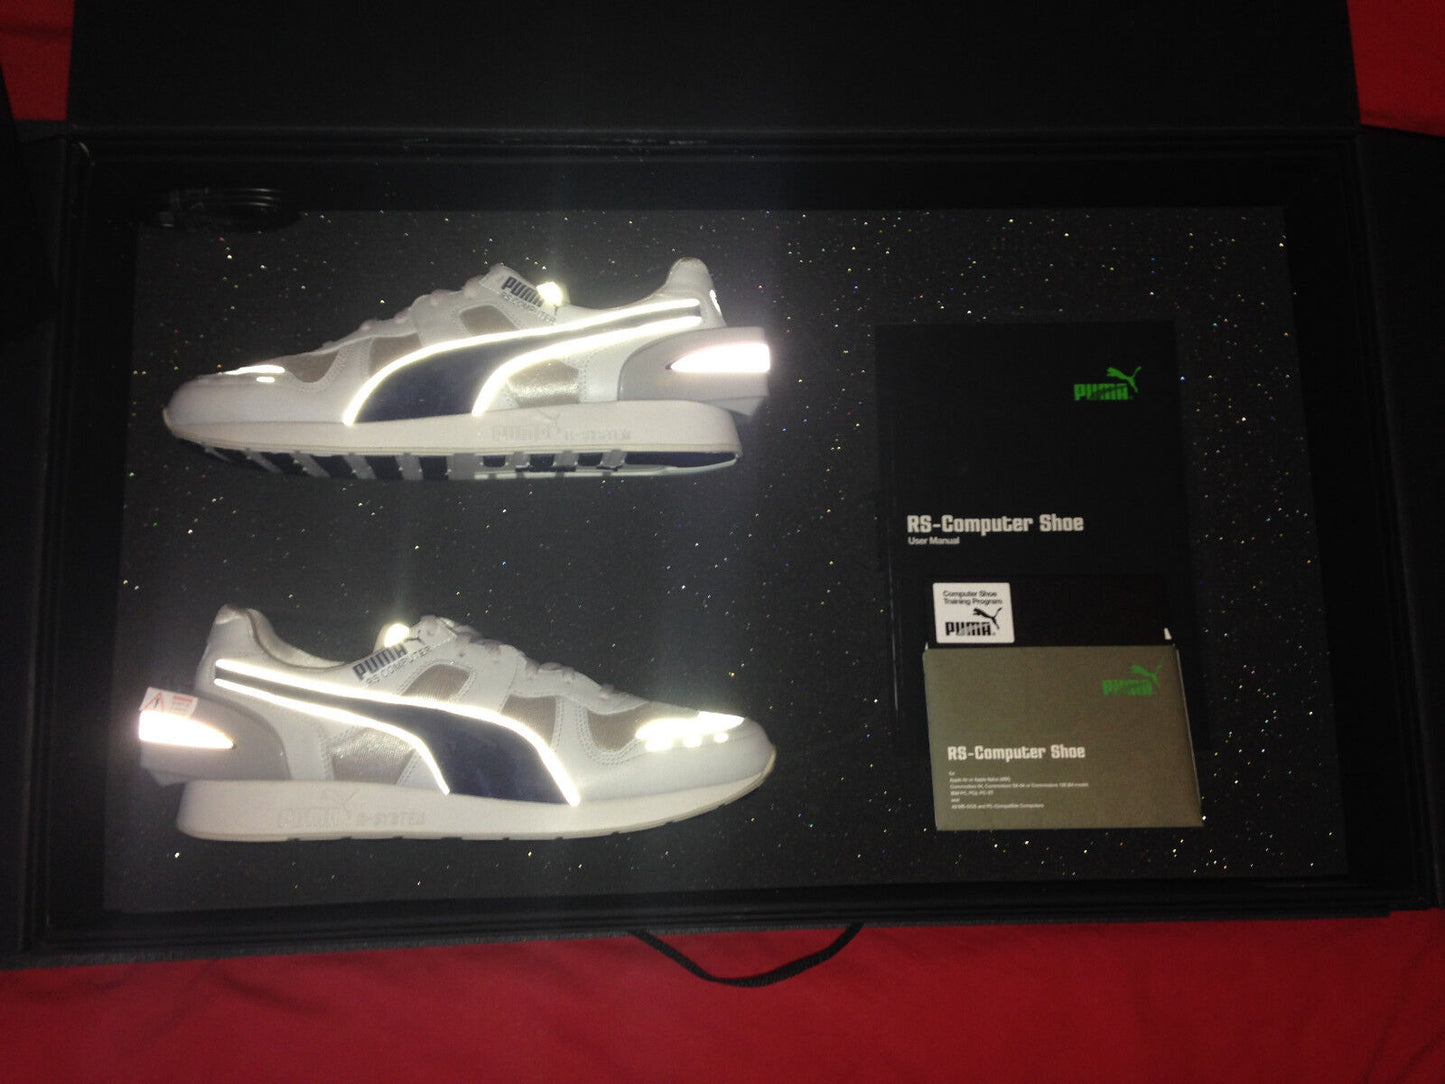 Puma RS Computer Shoe 1986-2018 #44 of 86 pairs worldwide new US 10 UK 9 EUR 43